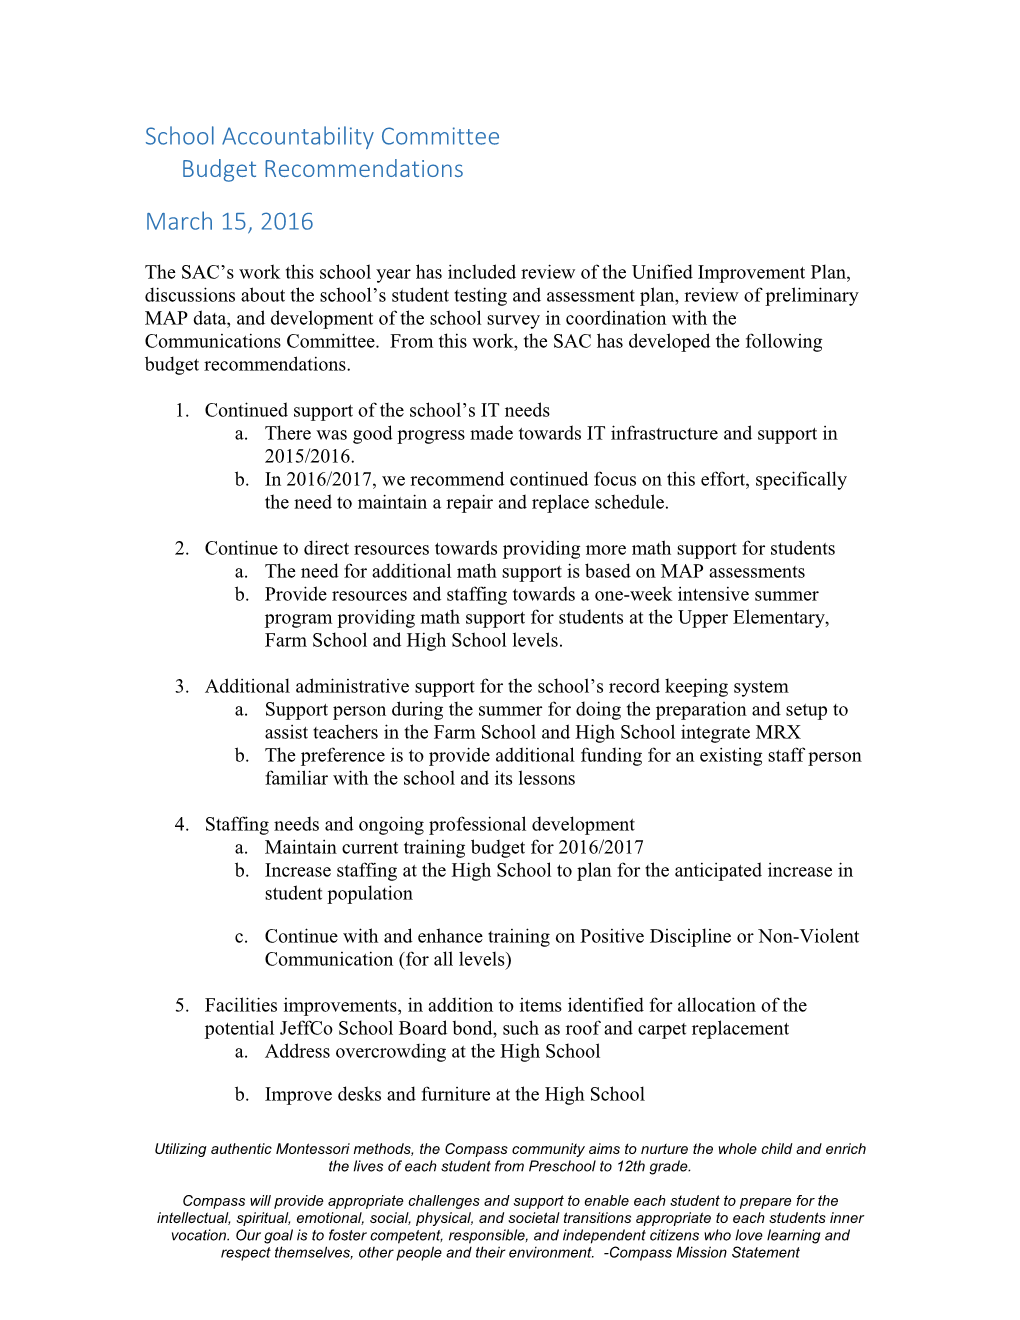 School Accountability Committee Budget Recommendations